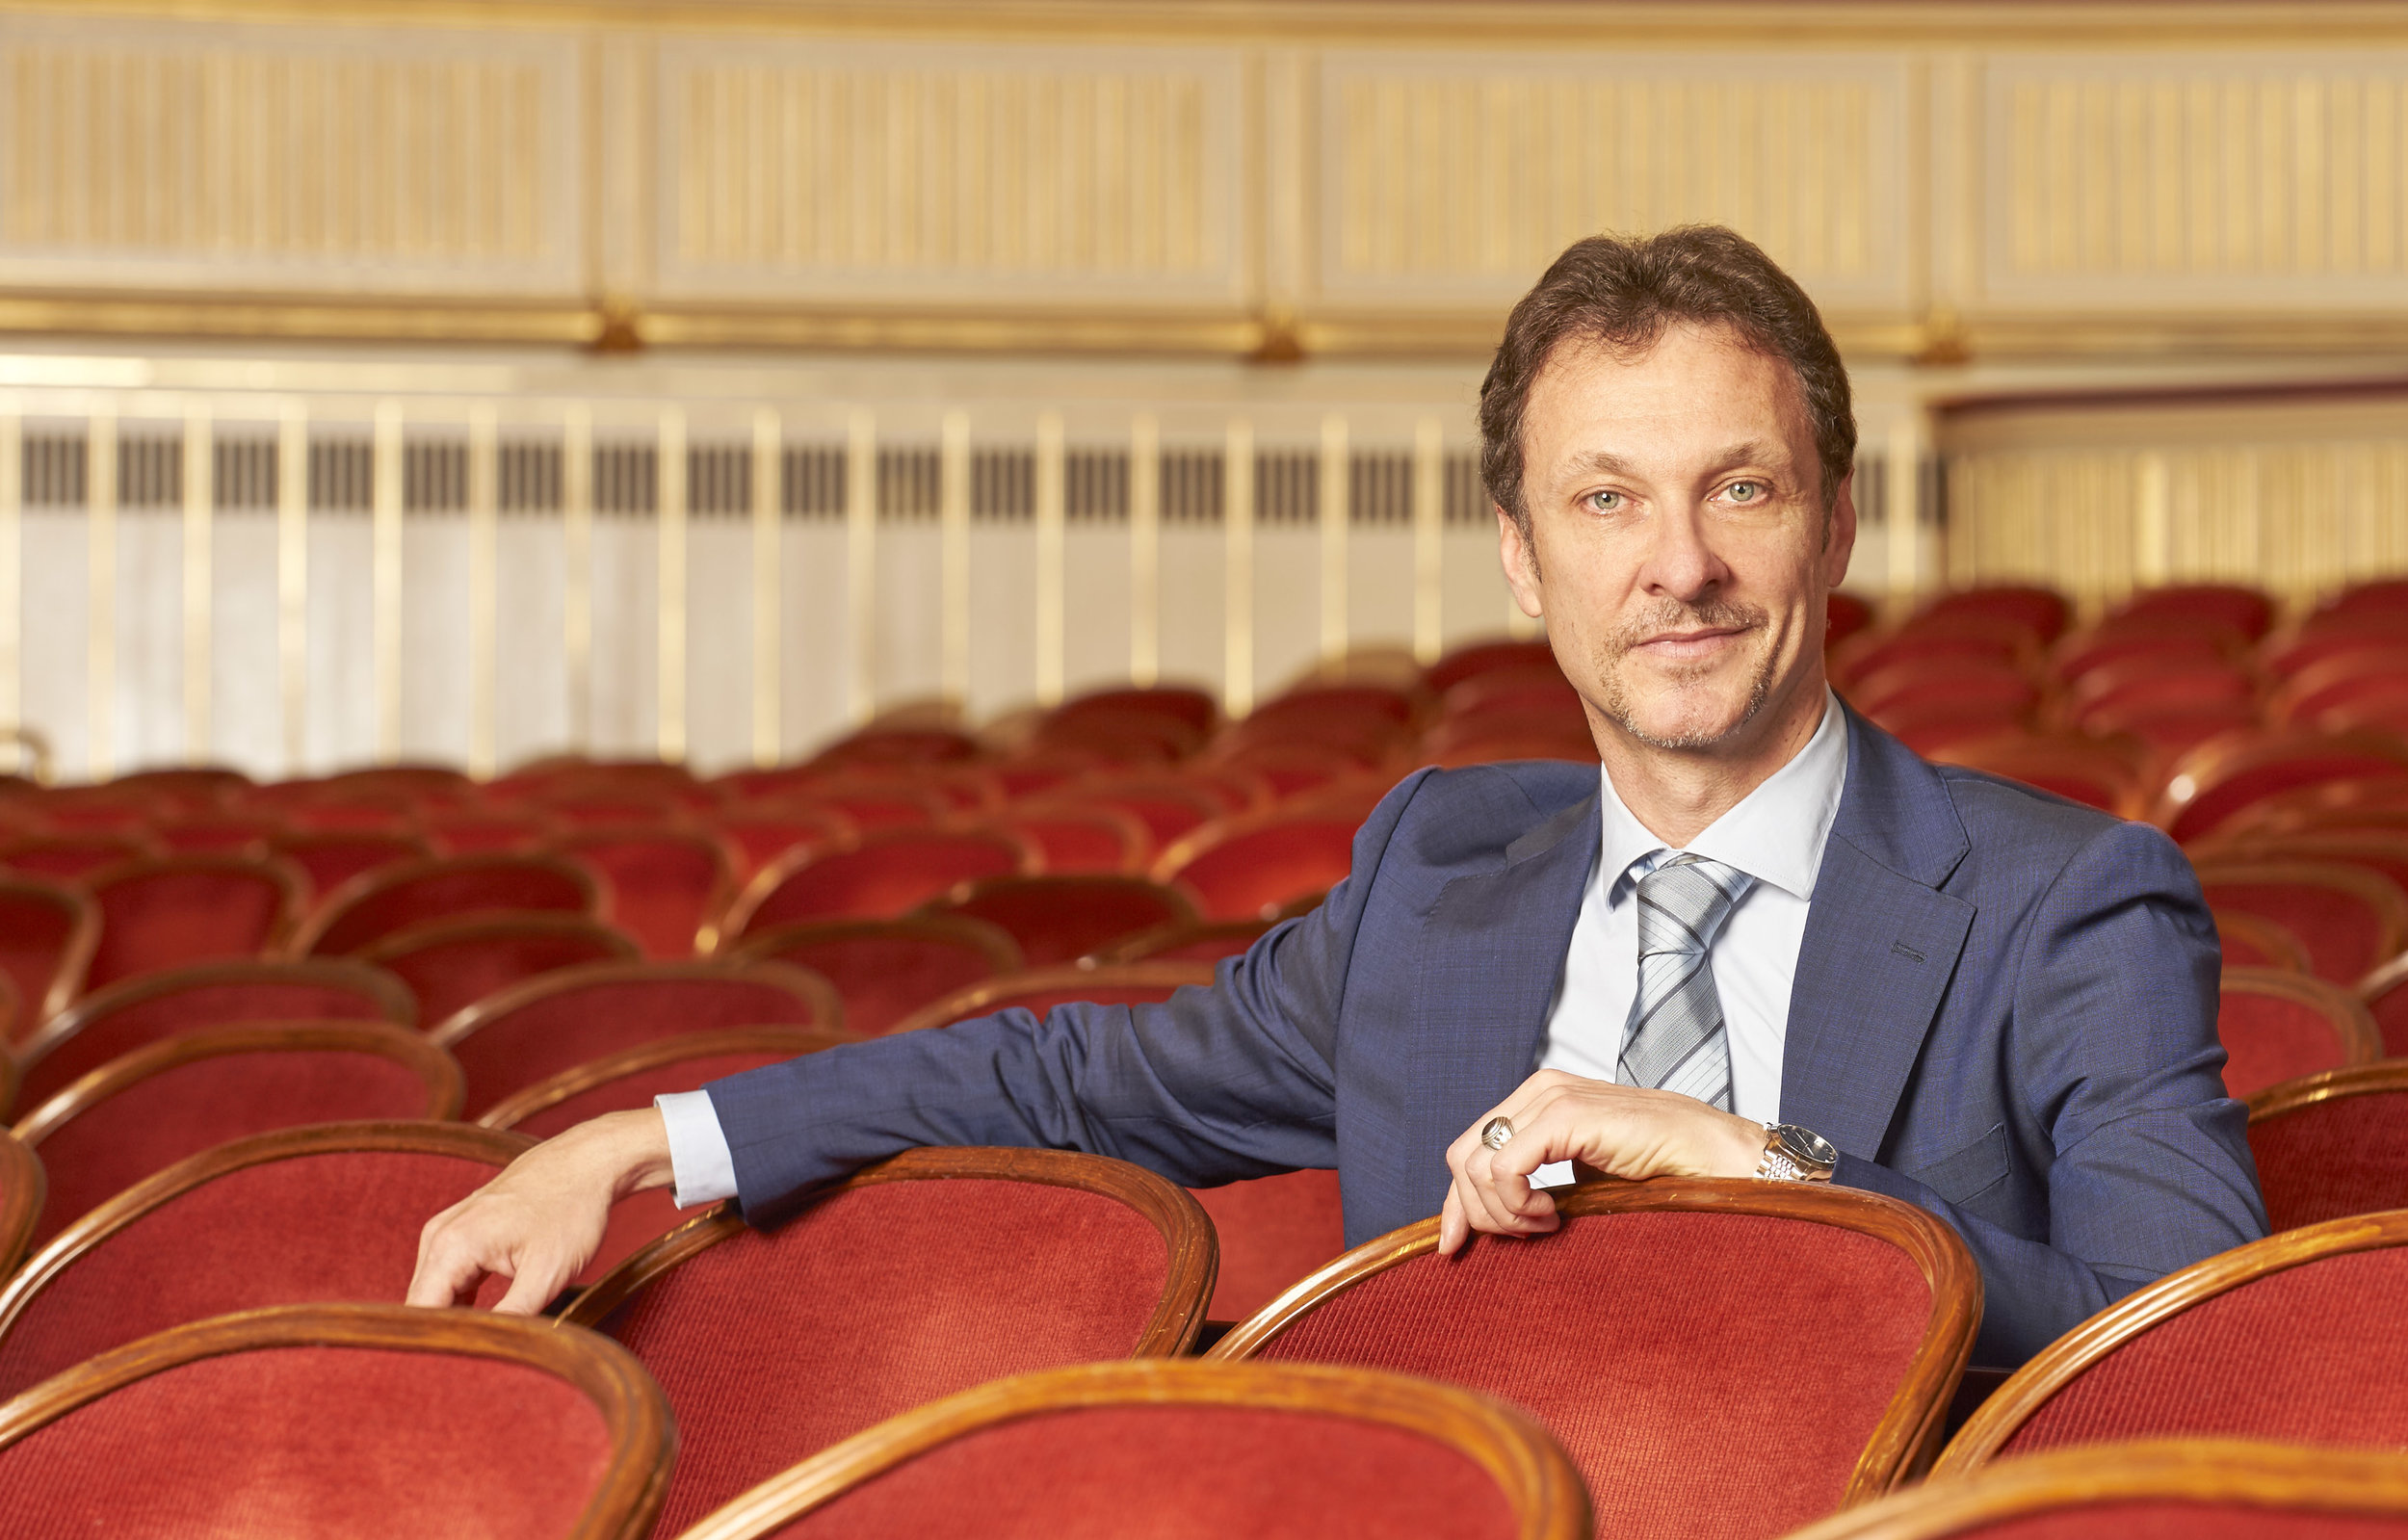 Manuel Legris will finish his period as the Director of the Vienna ...